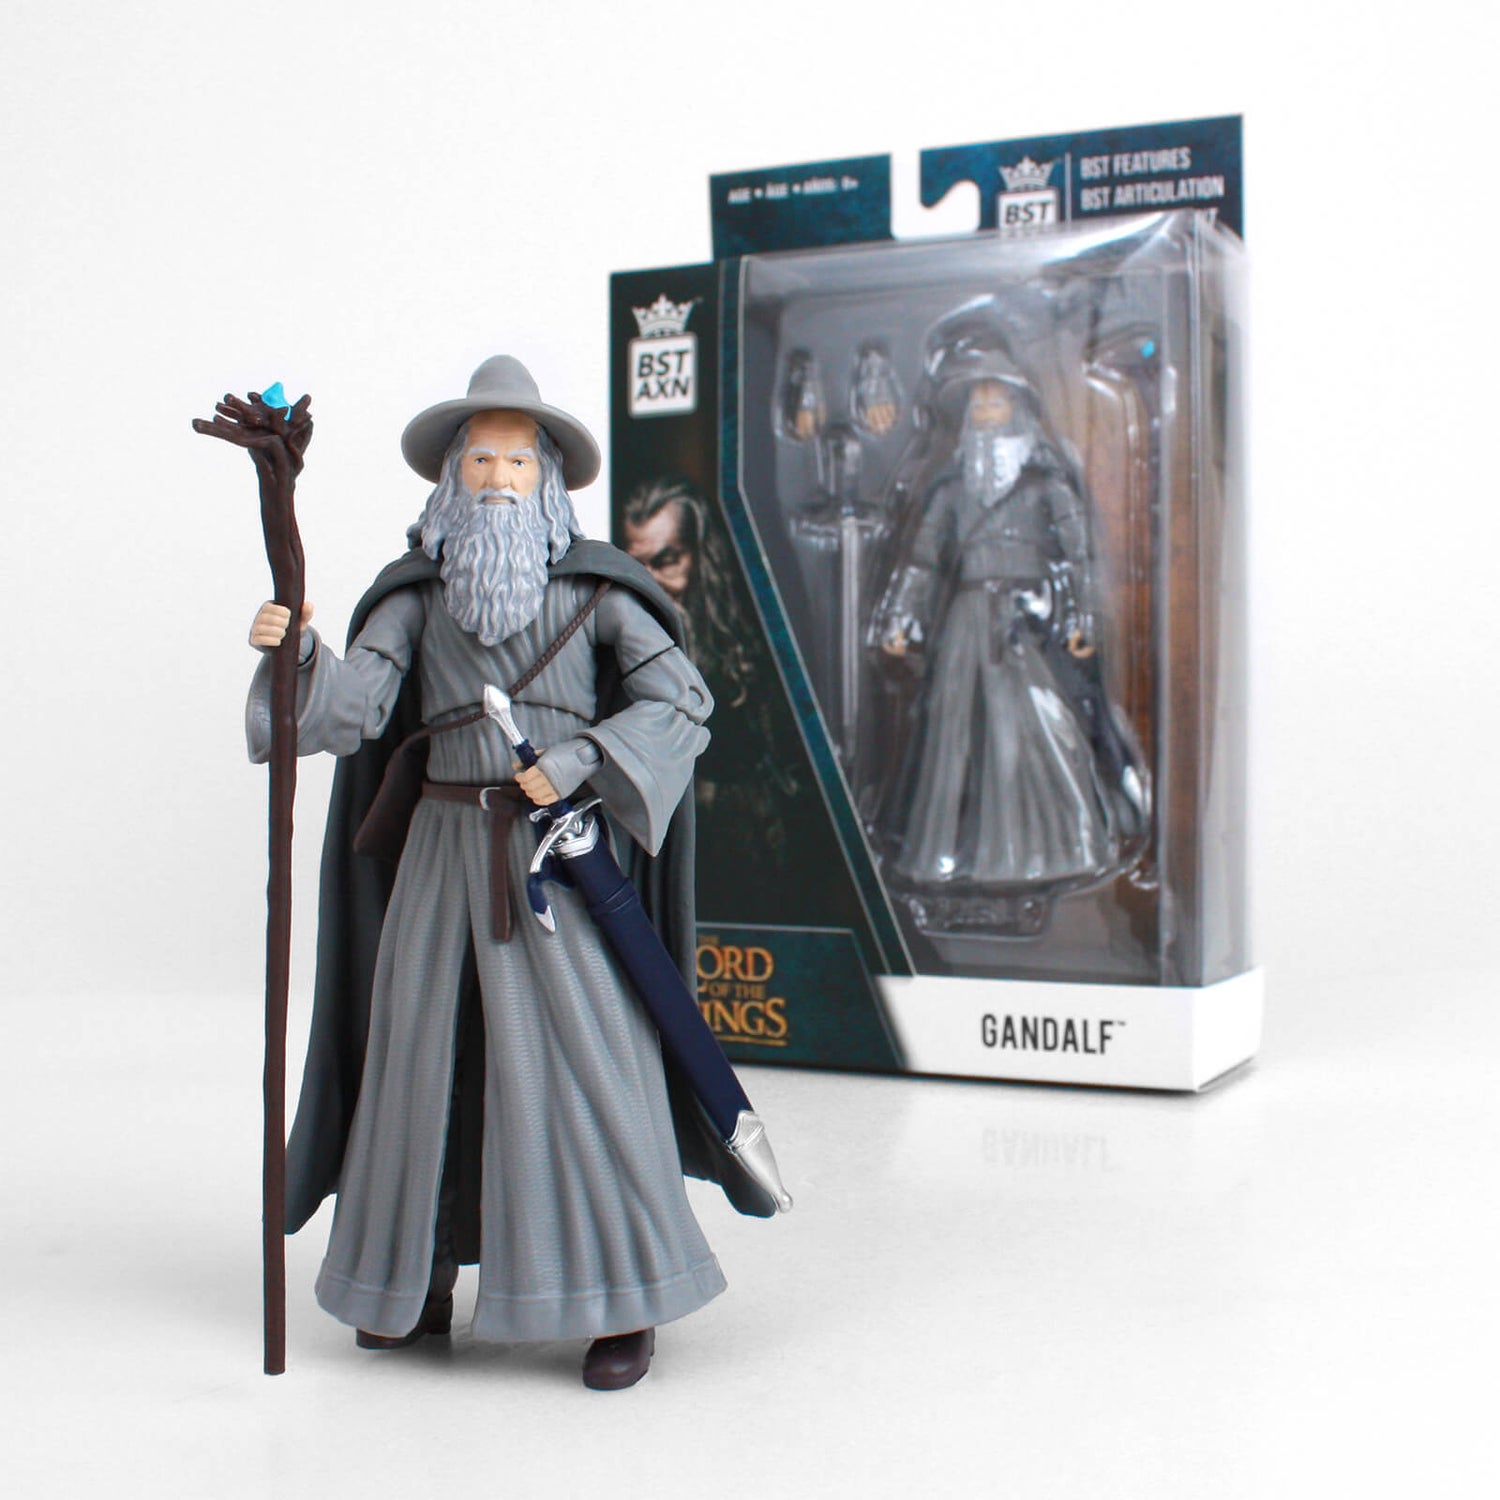 The Loyal Subjects BST AXN Lord Of The Rings 5in Action Figure - Gandalf the Grey